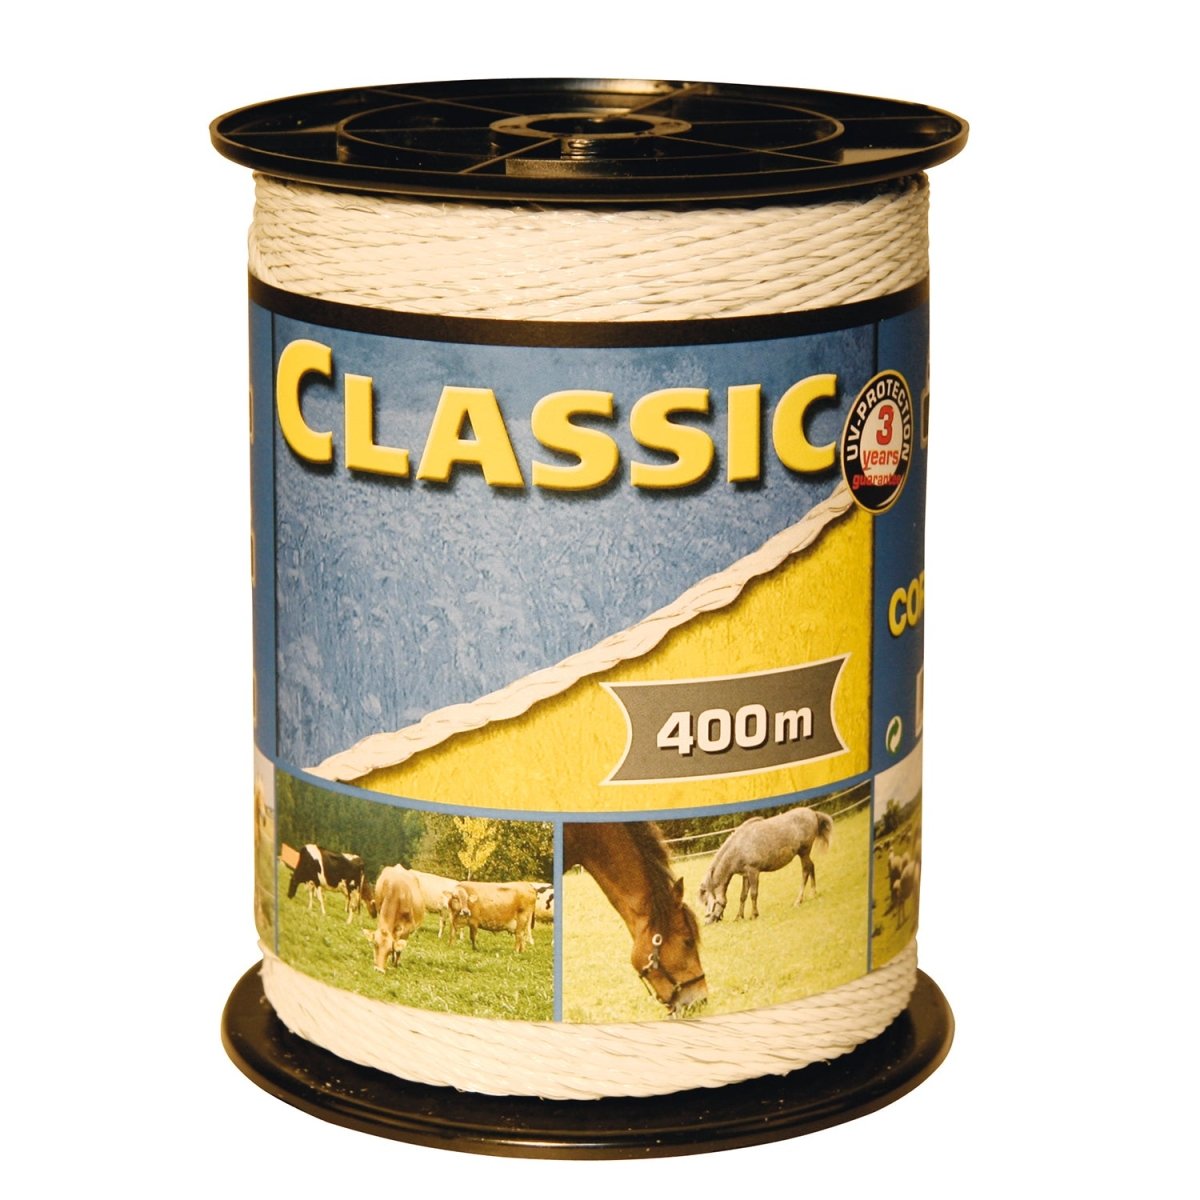 Corral Classic Fencing Polywire - 400M -